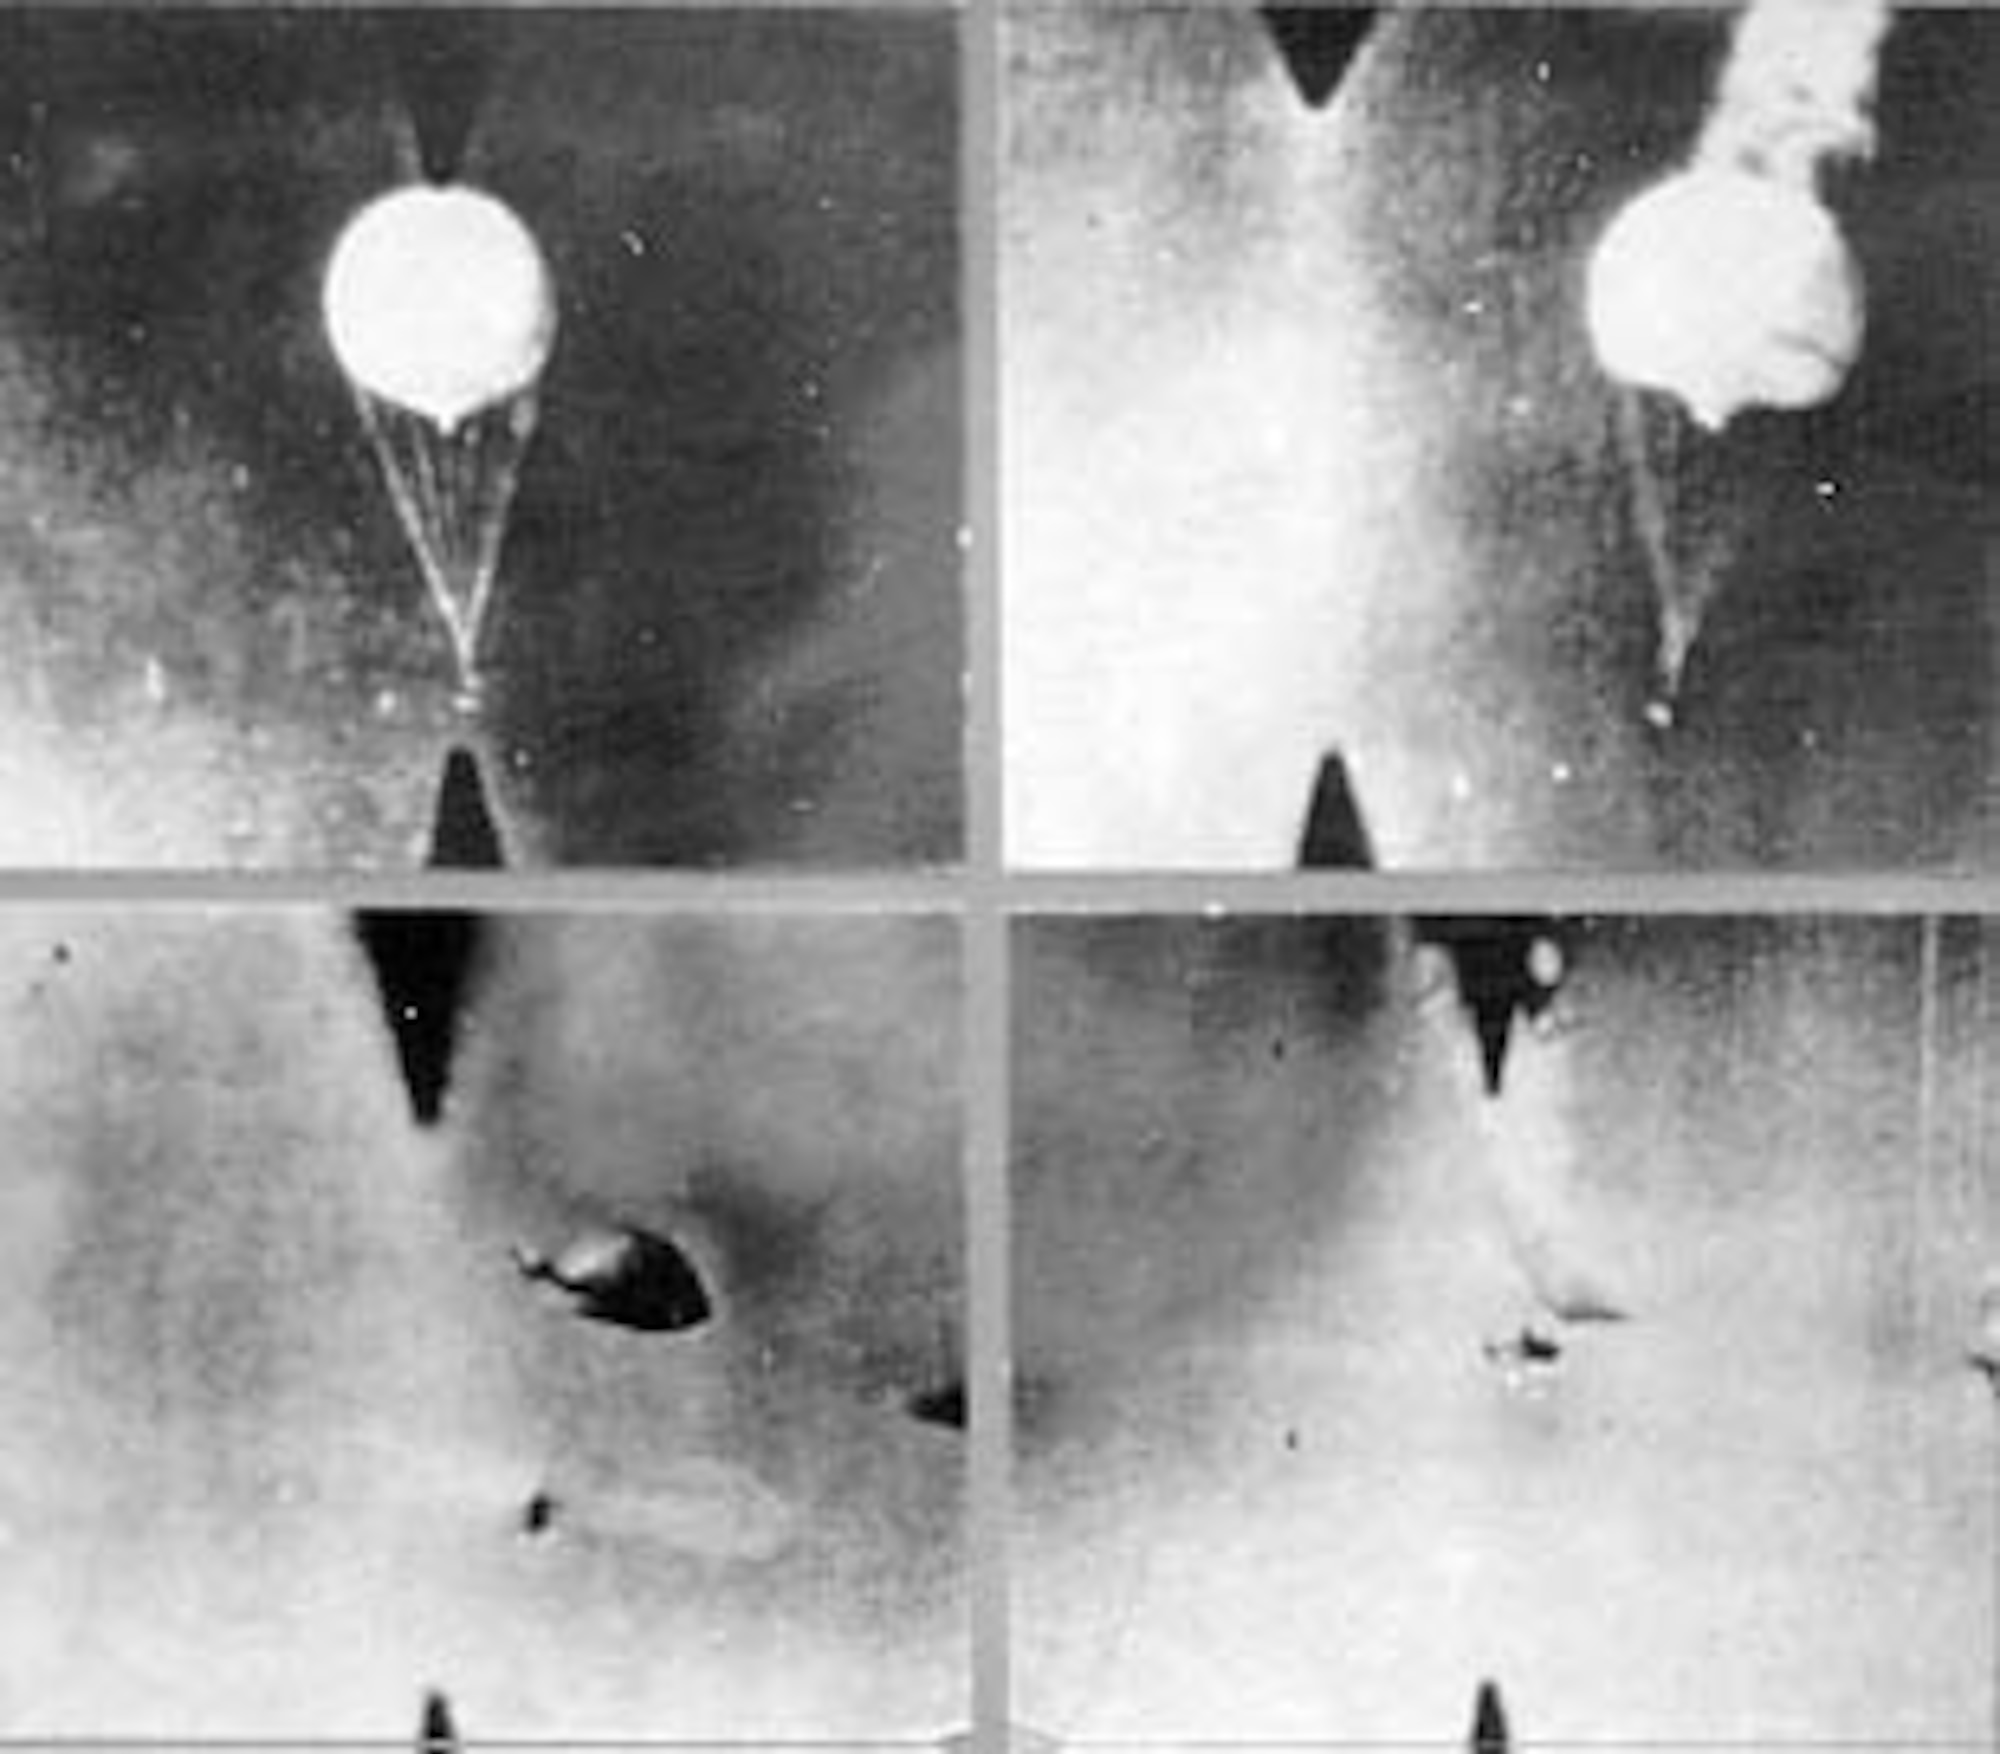 This gun camera photograph shows balloons being shot down by 11th Air Force fighters near Attu in the Aleutians on April 11, 1945. Nine balloons were downed in two hours. Note the P-38 in lower right frame. (U.S. Air Force photo)